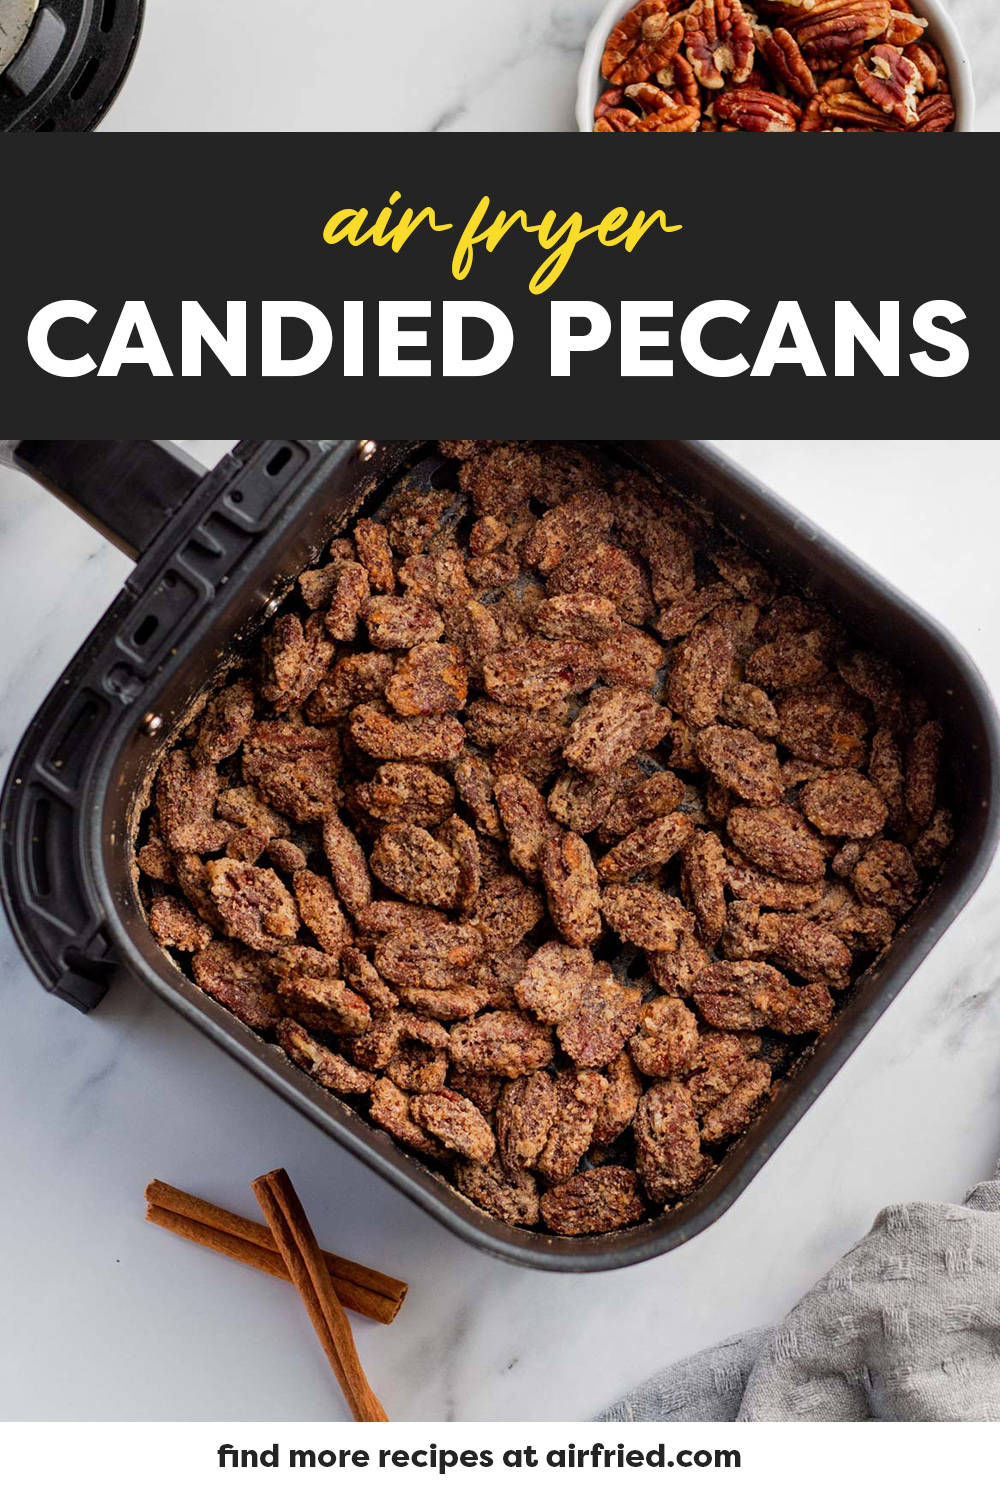 Candied pecans in an air fryer basket.